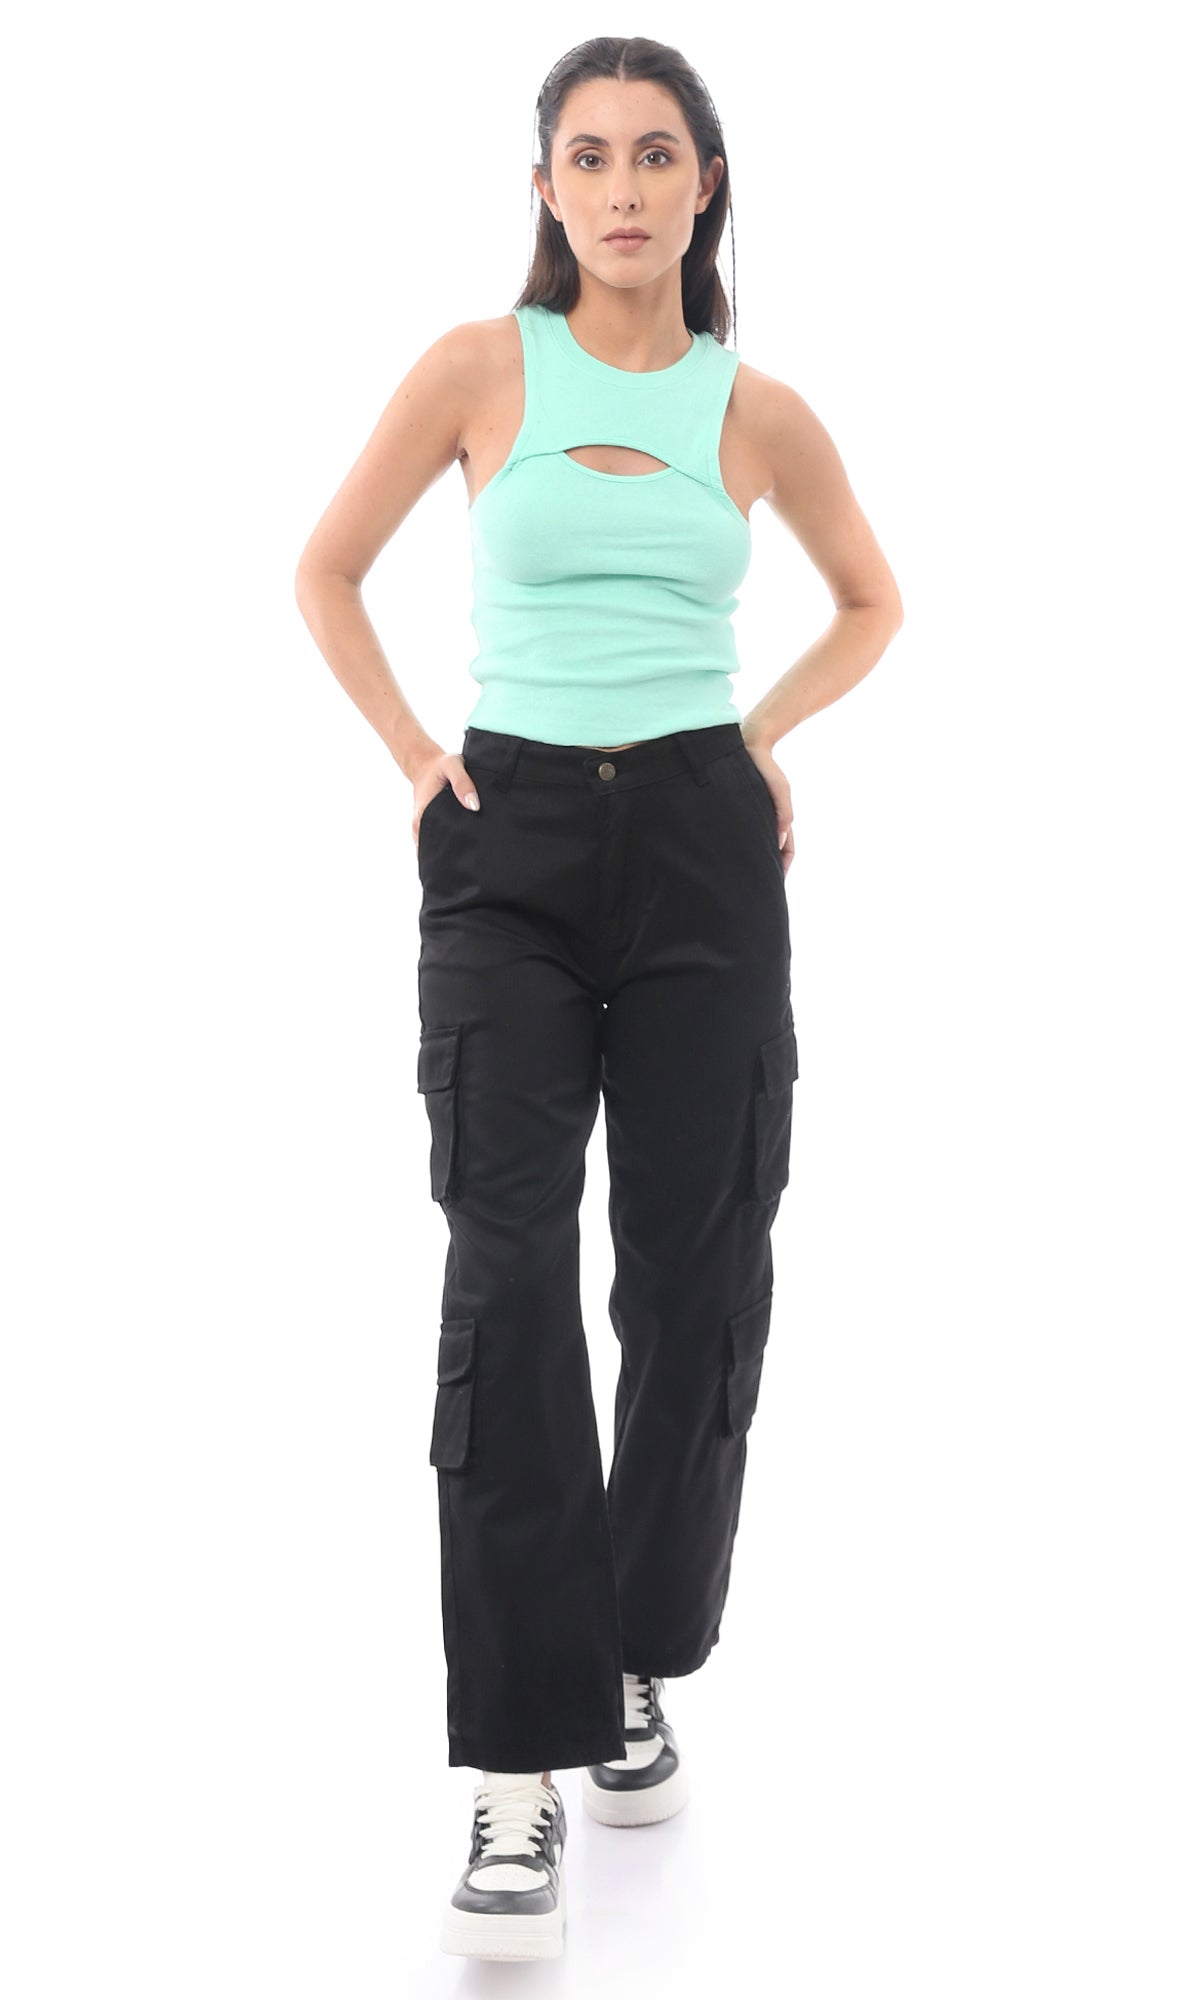 O169942 Cotton Black Buttoned Casual Trousers